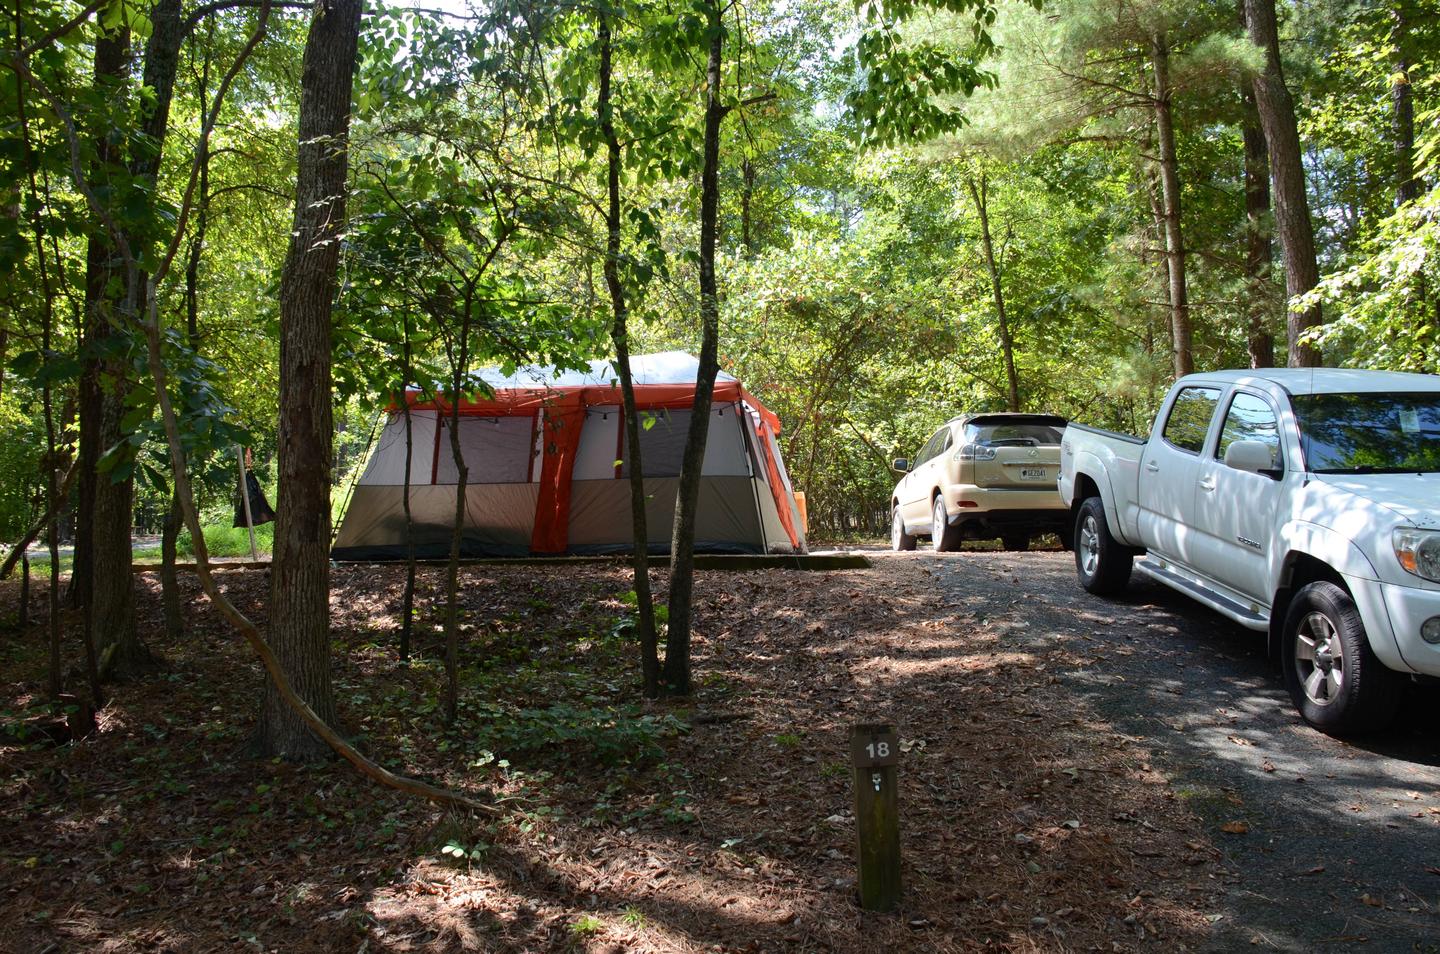 Driveway slope, awning-side clearance-2.McKinney Campground, campsite 18.